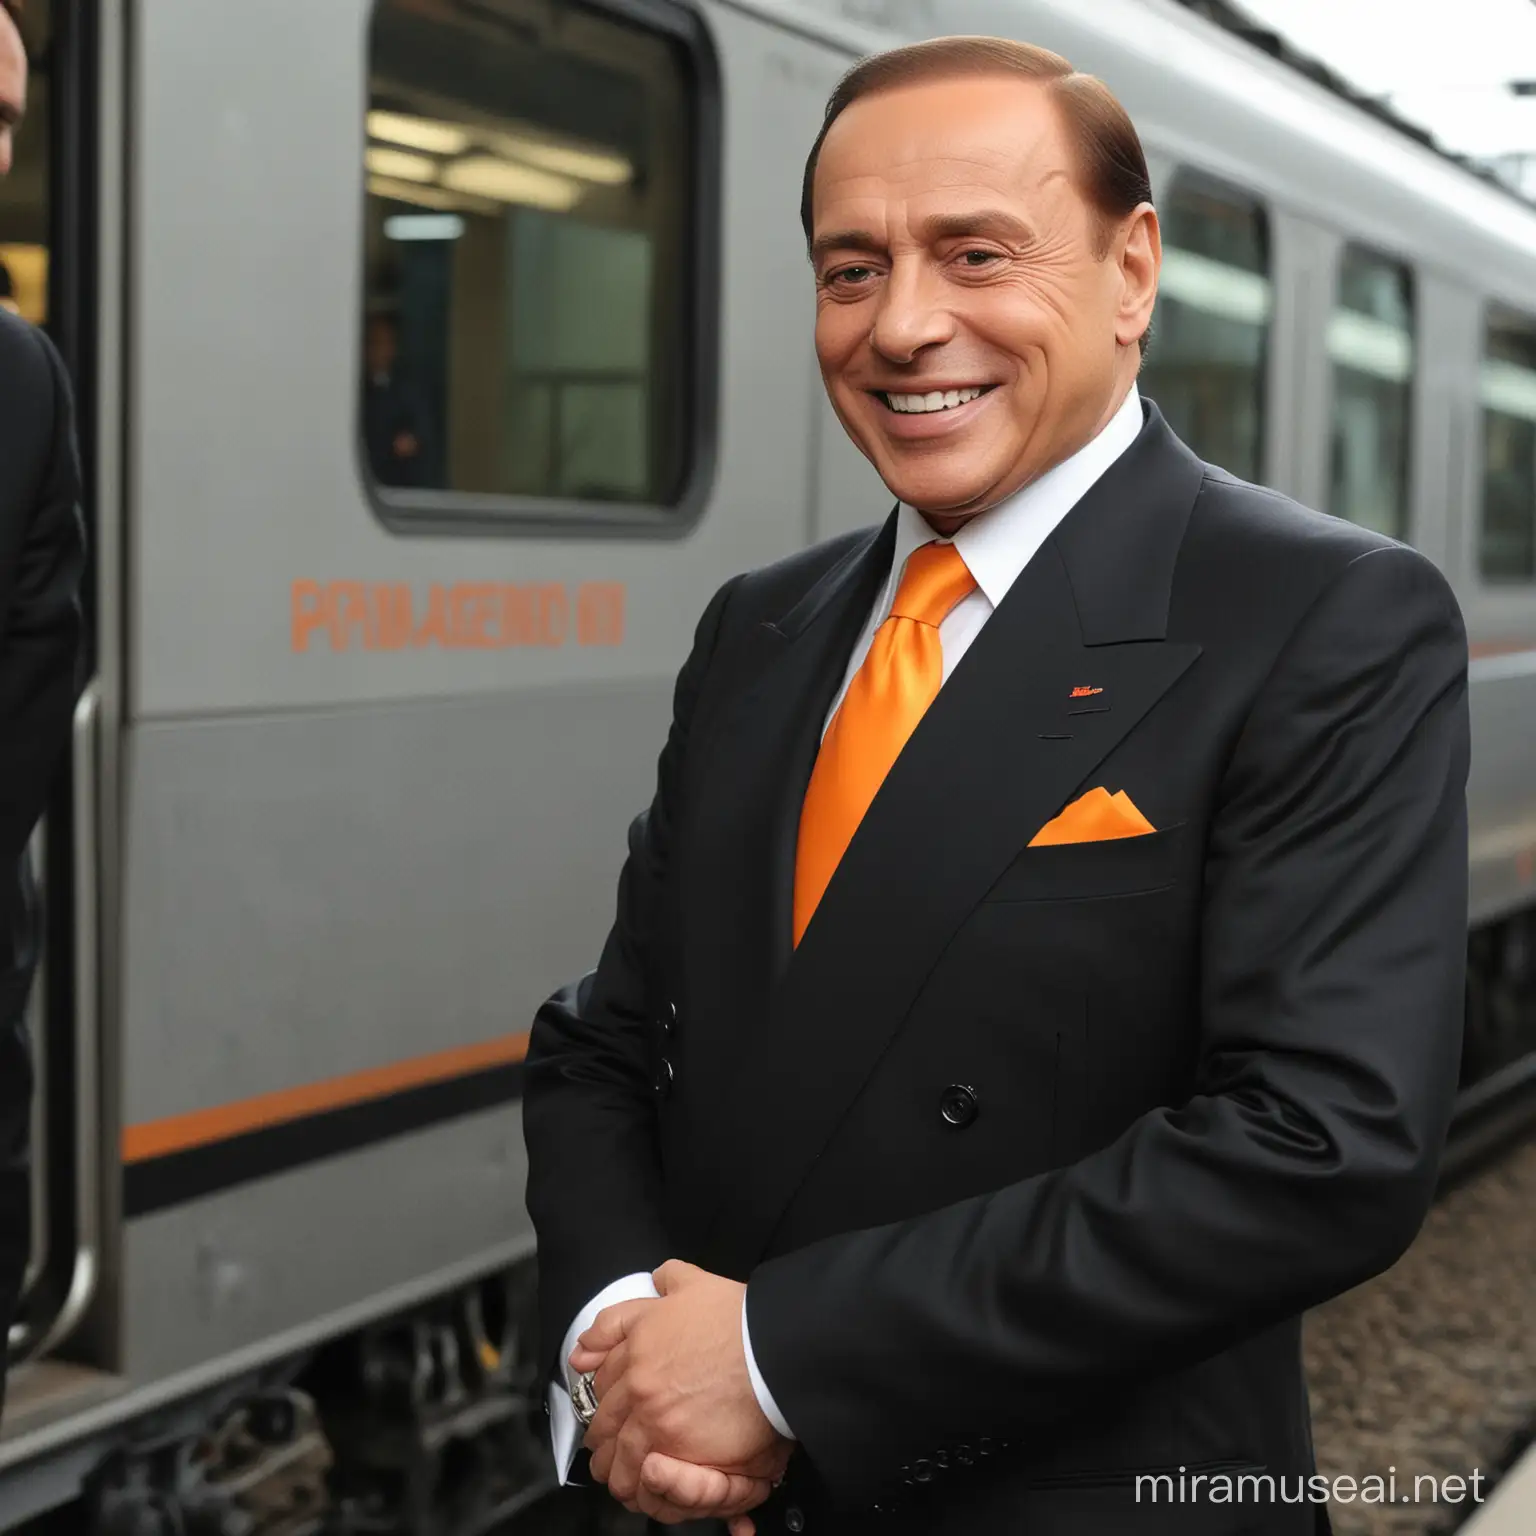 Berlusconi looking handsome smiling with a black suit and an orange tie at a train staton